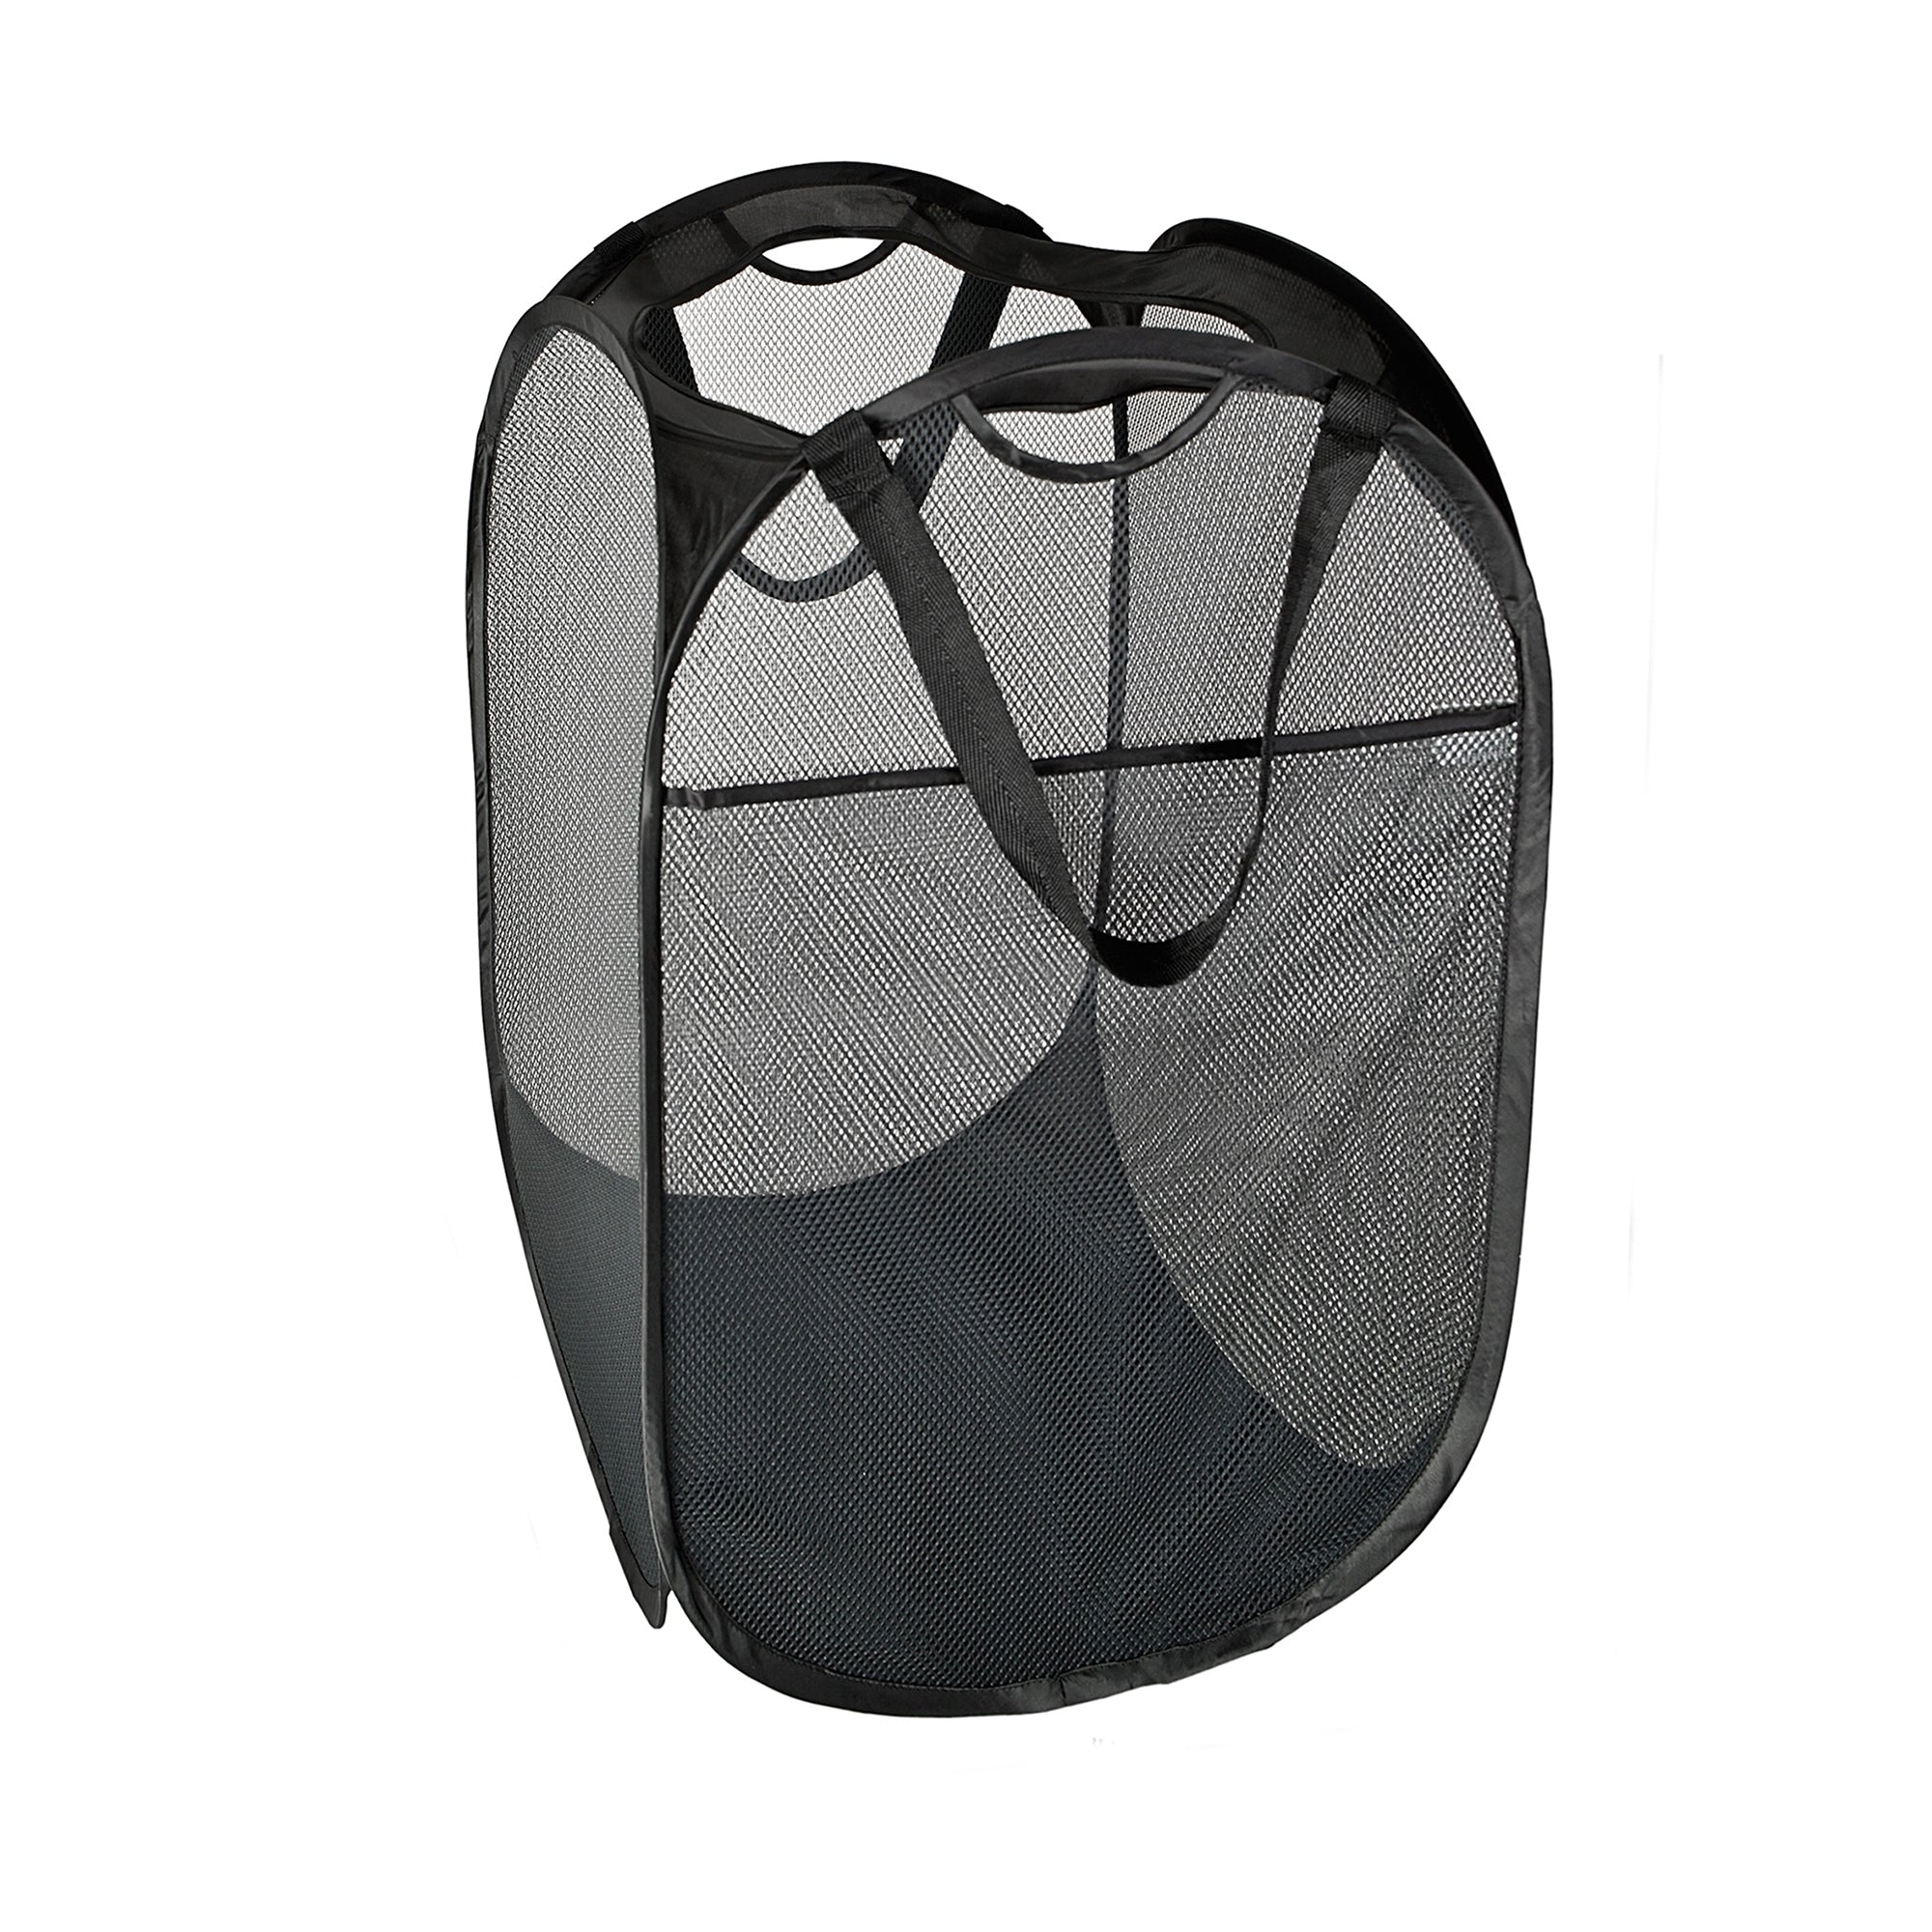 Deluxe Mesh Pop Up Square Laundry Hamper with Side Pocket and Handles - VentilAir Fabric - Collapsible Smart Design® 4